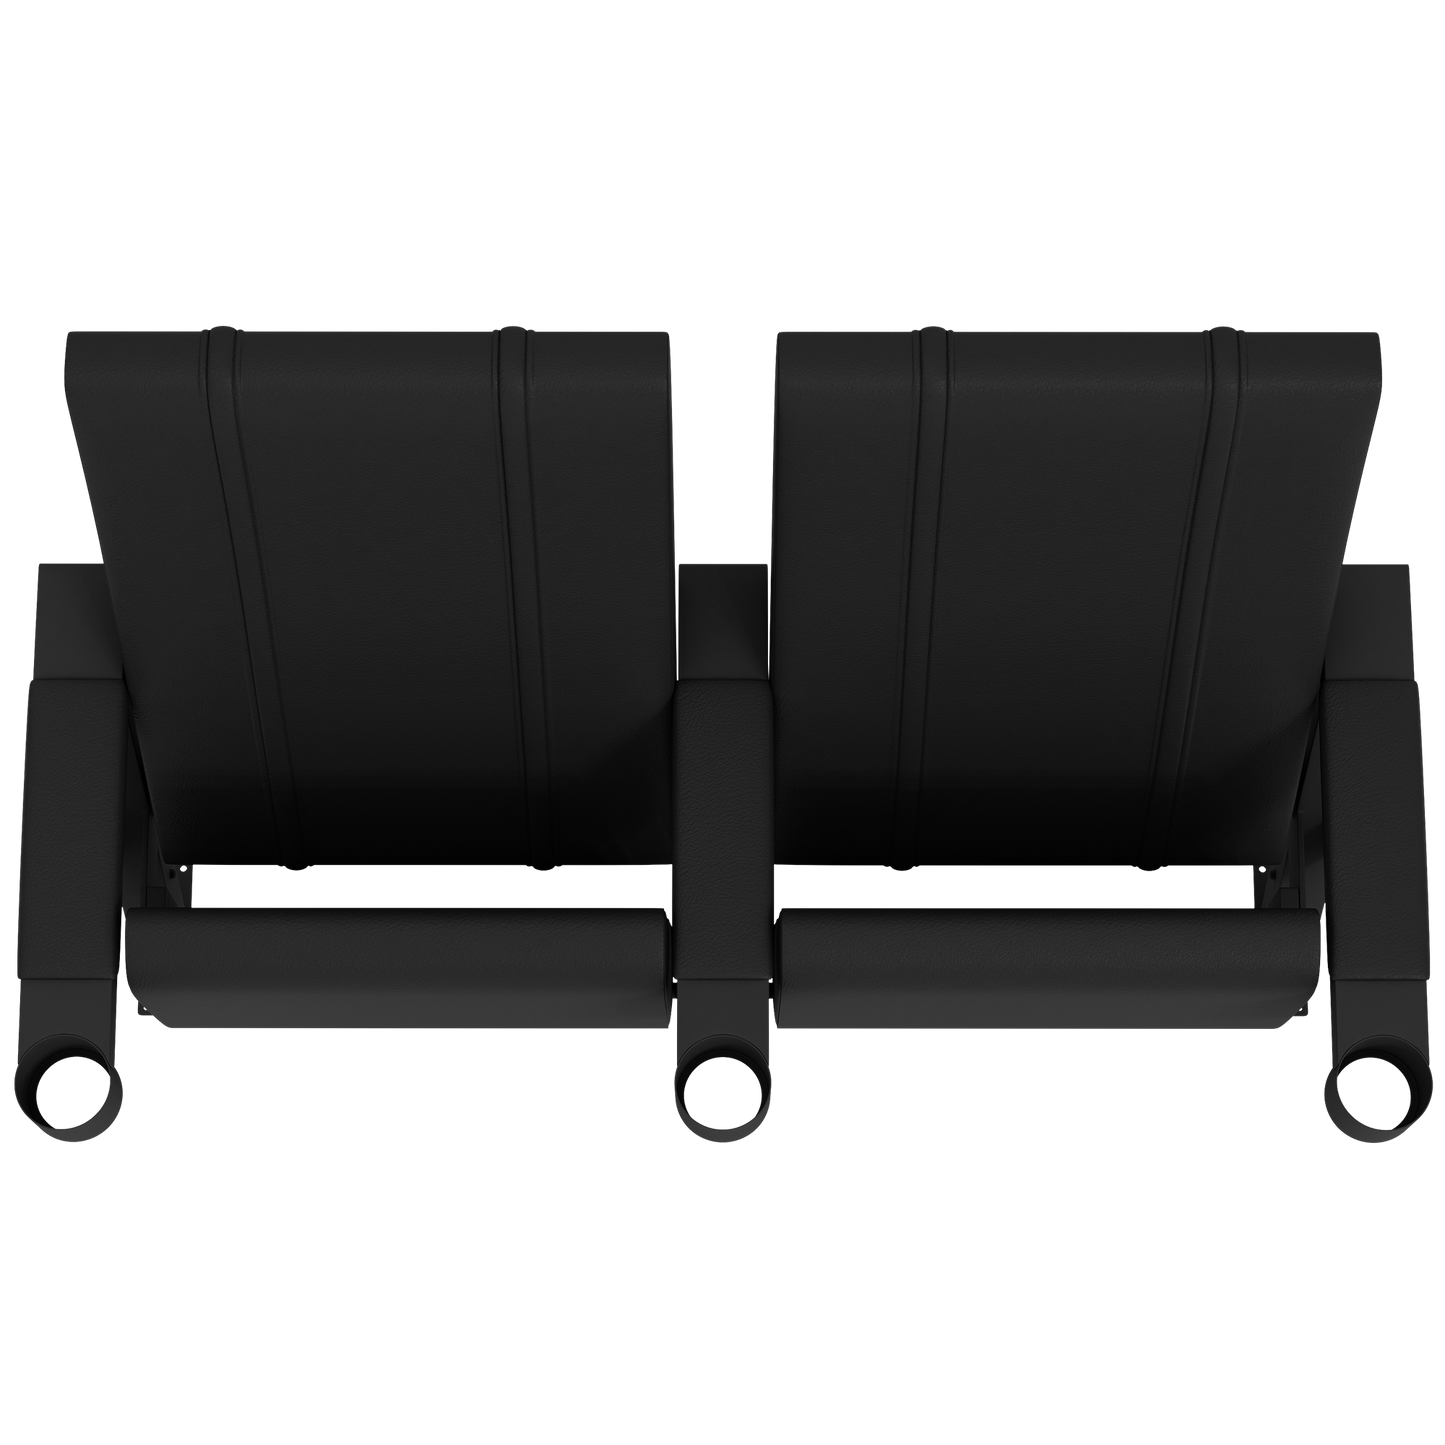 SuiteMax 3.5 VIP Seats with St Louis Cardinals Secondary Logo